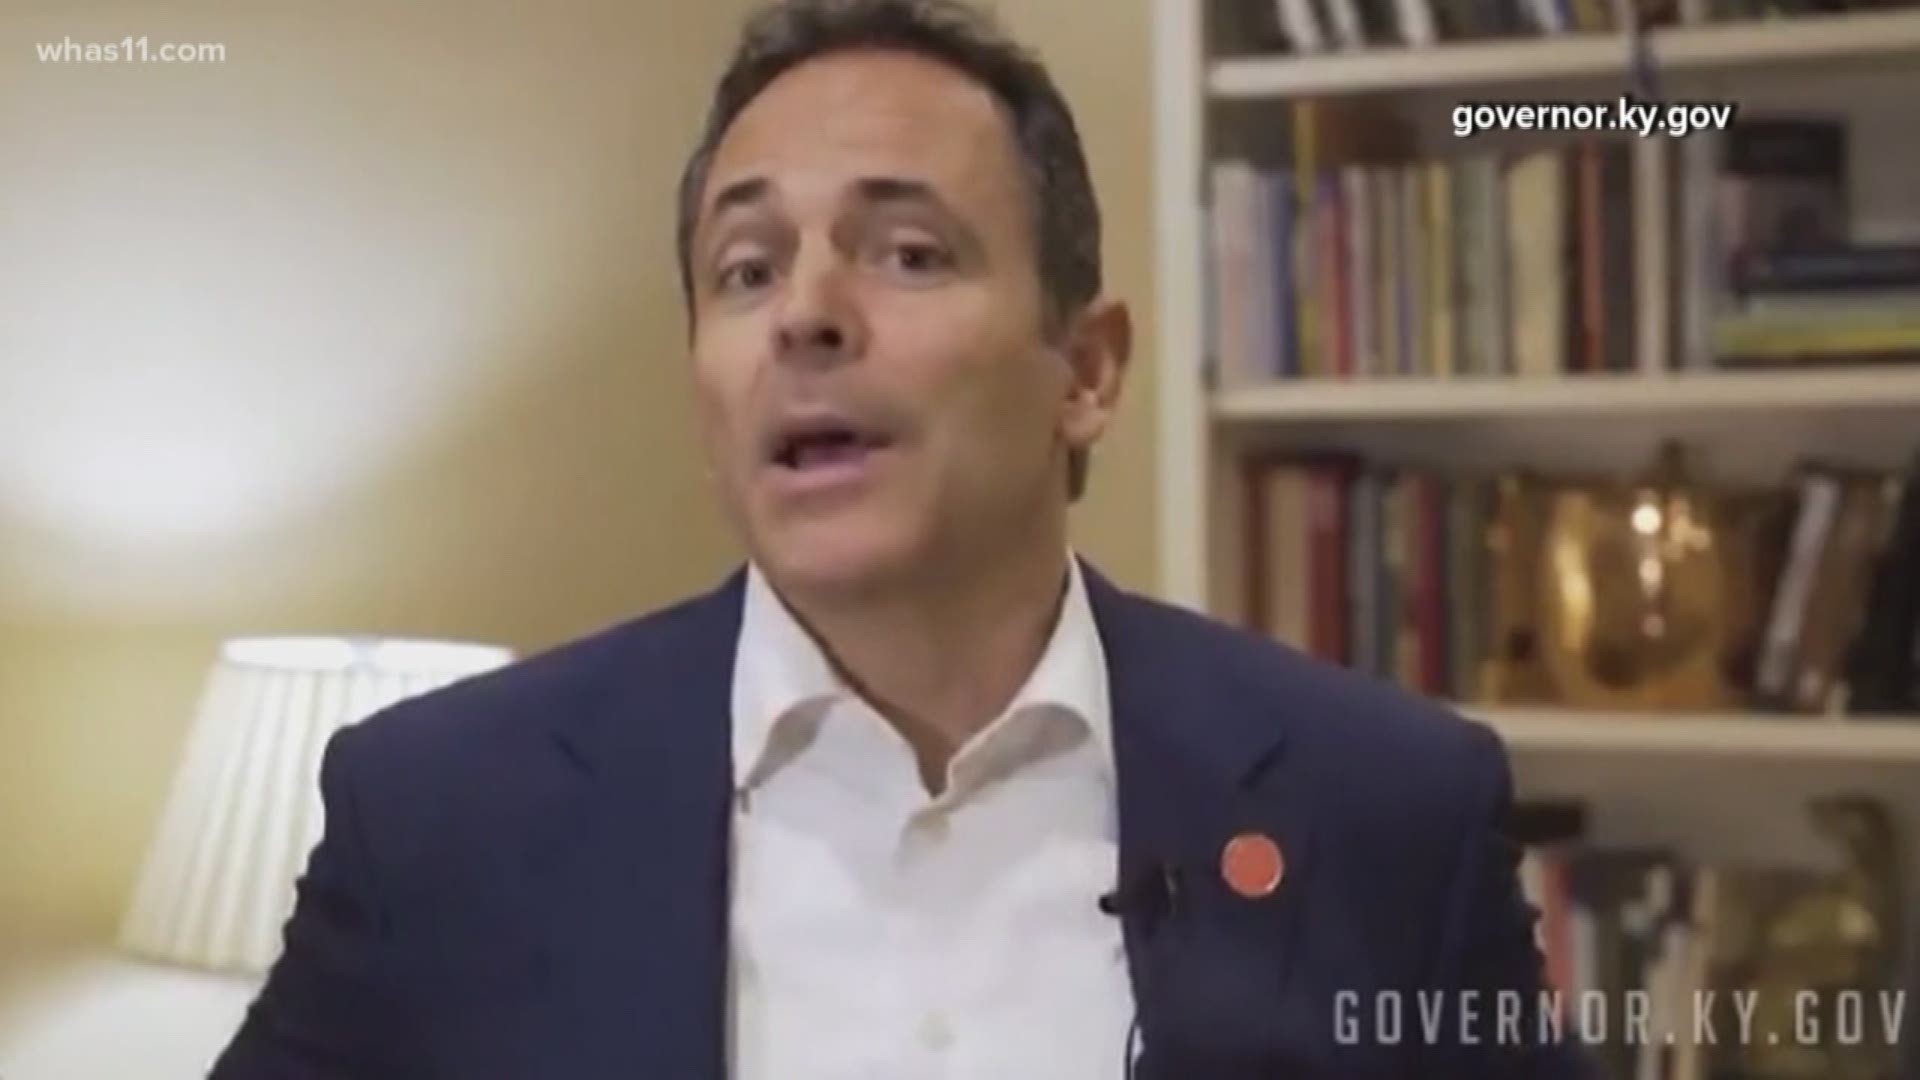 Kentucky Governor Matt Bevin took to social media today throwing verbal grenades at the likes of Congressman John Yarmuth and others critical of his recent "blowing things up" video.